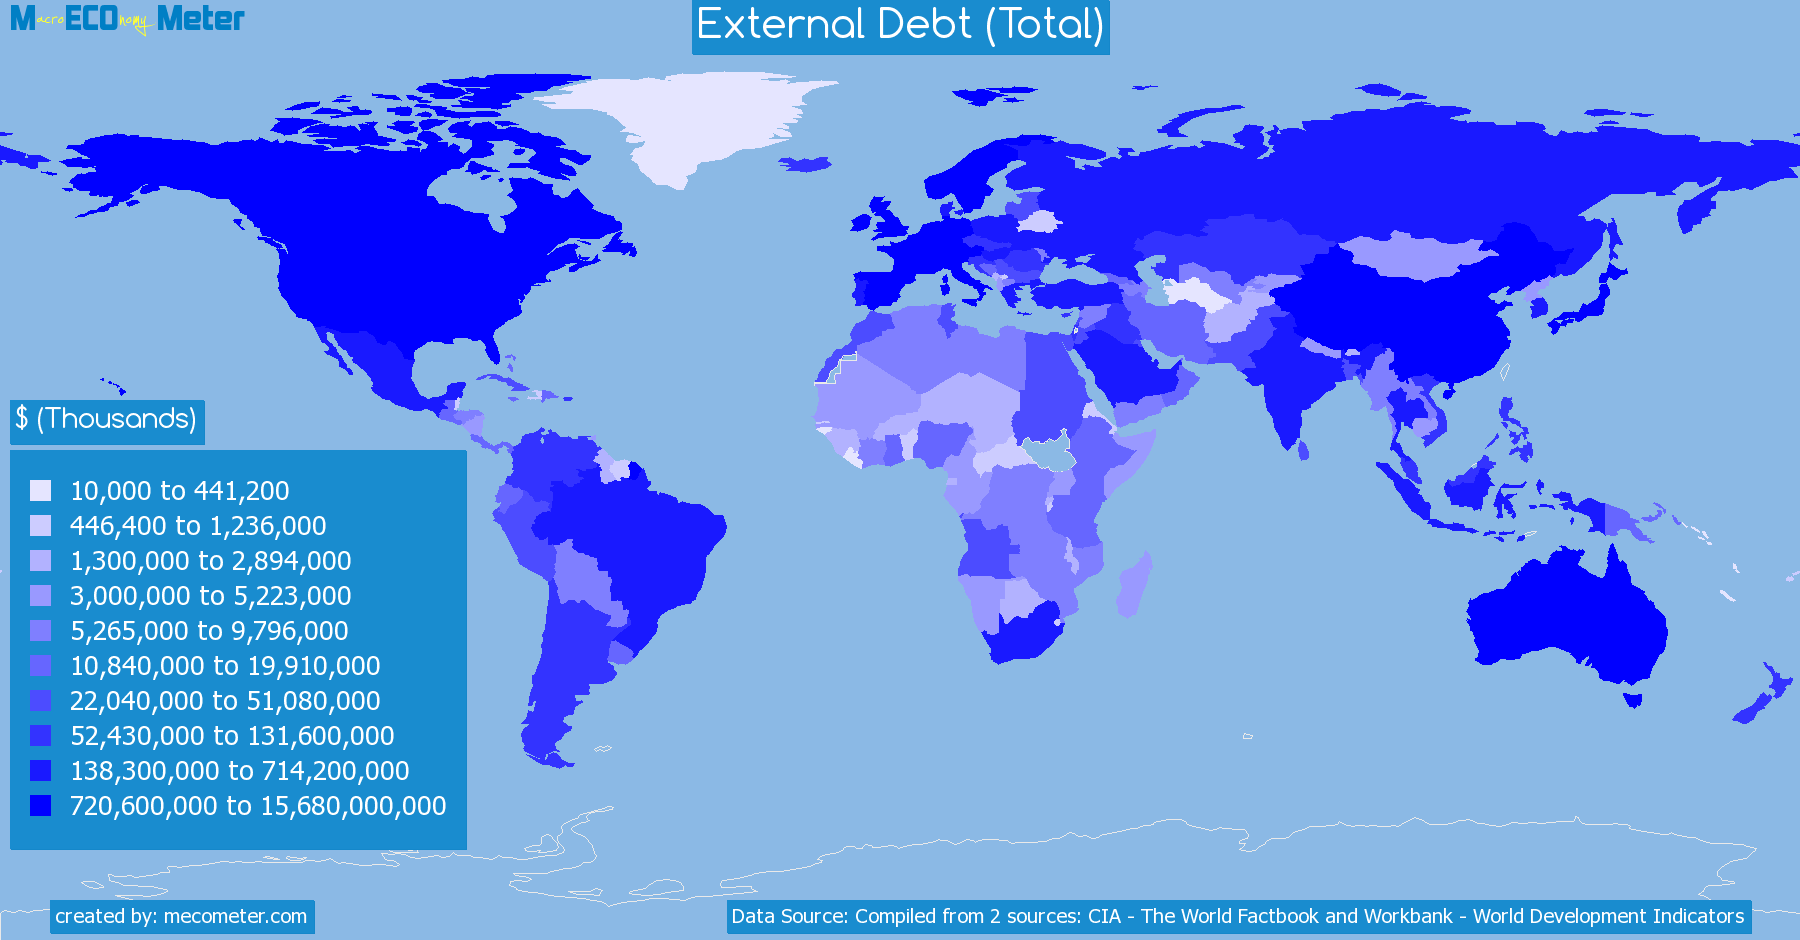 Worldmap of all countries colored to reflect the values of External Debt (Total)